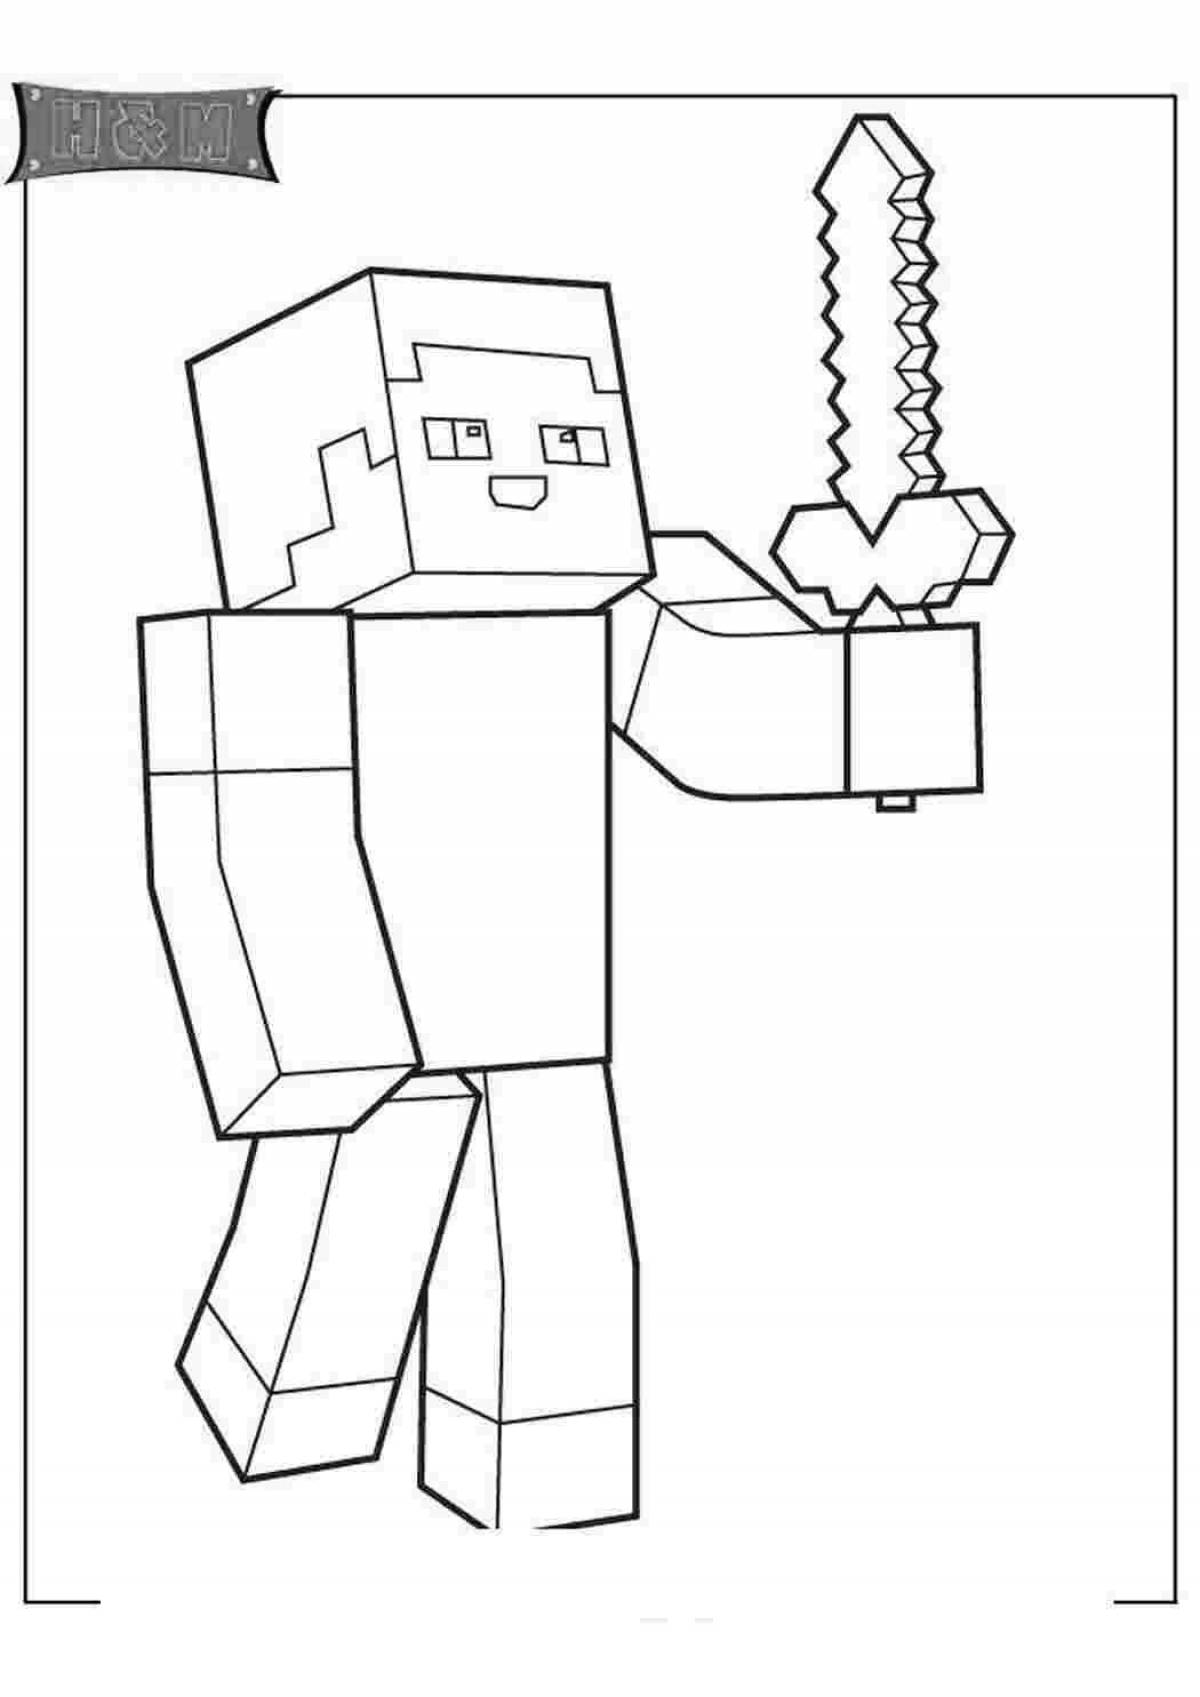 Funny minecraft shield coloring page